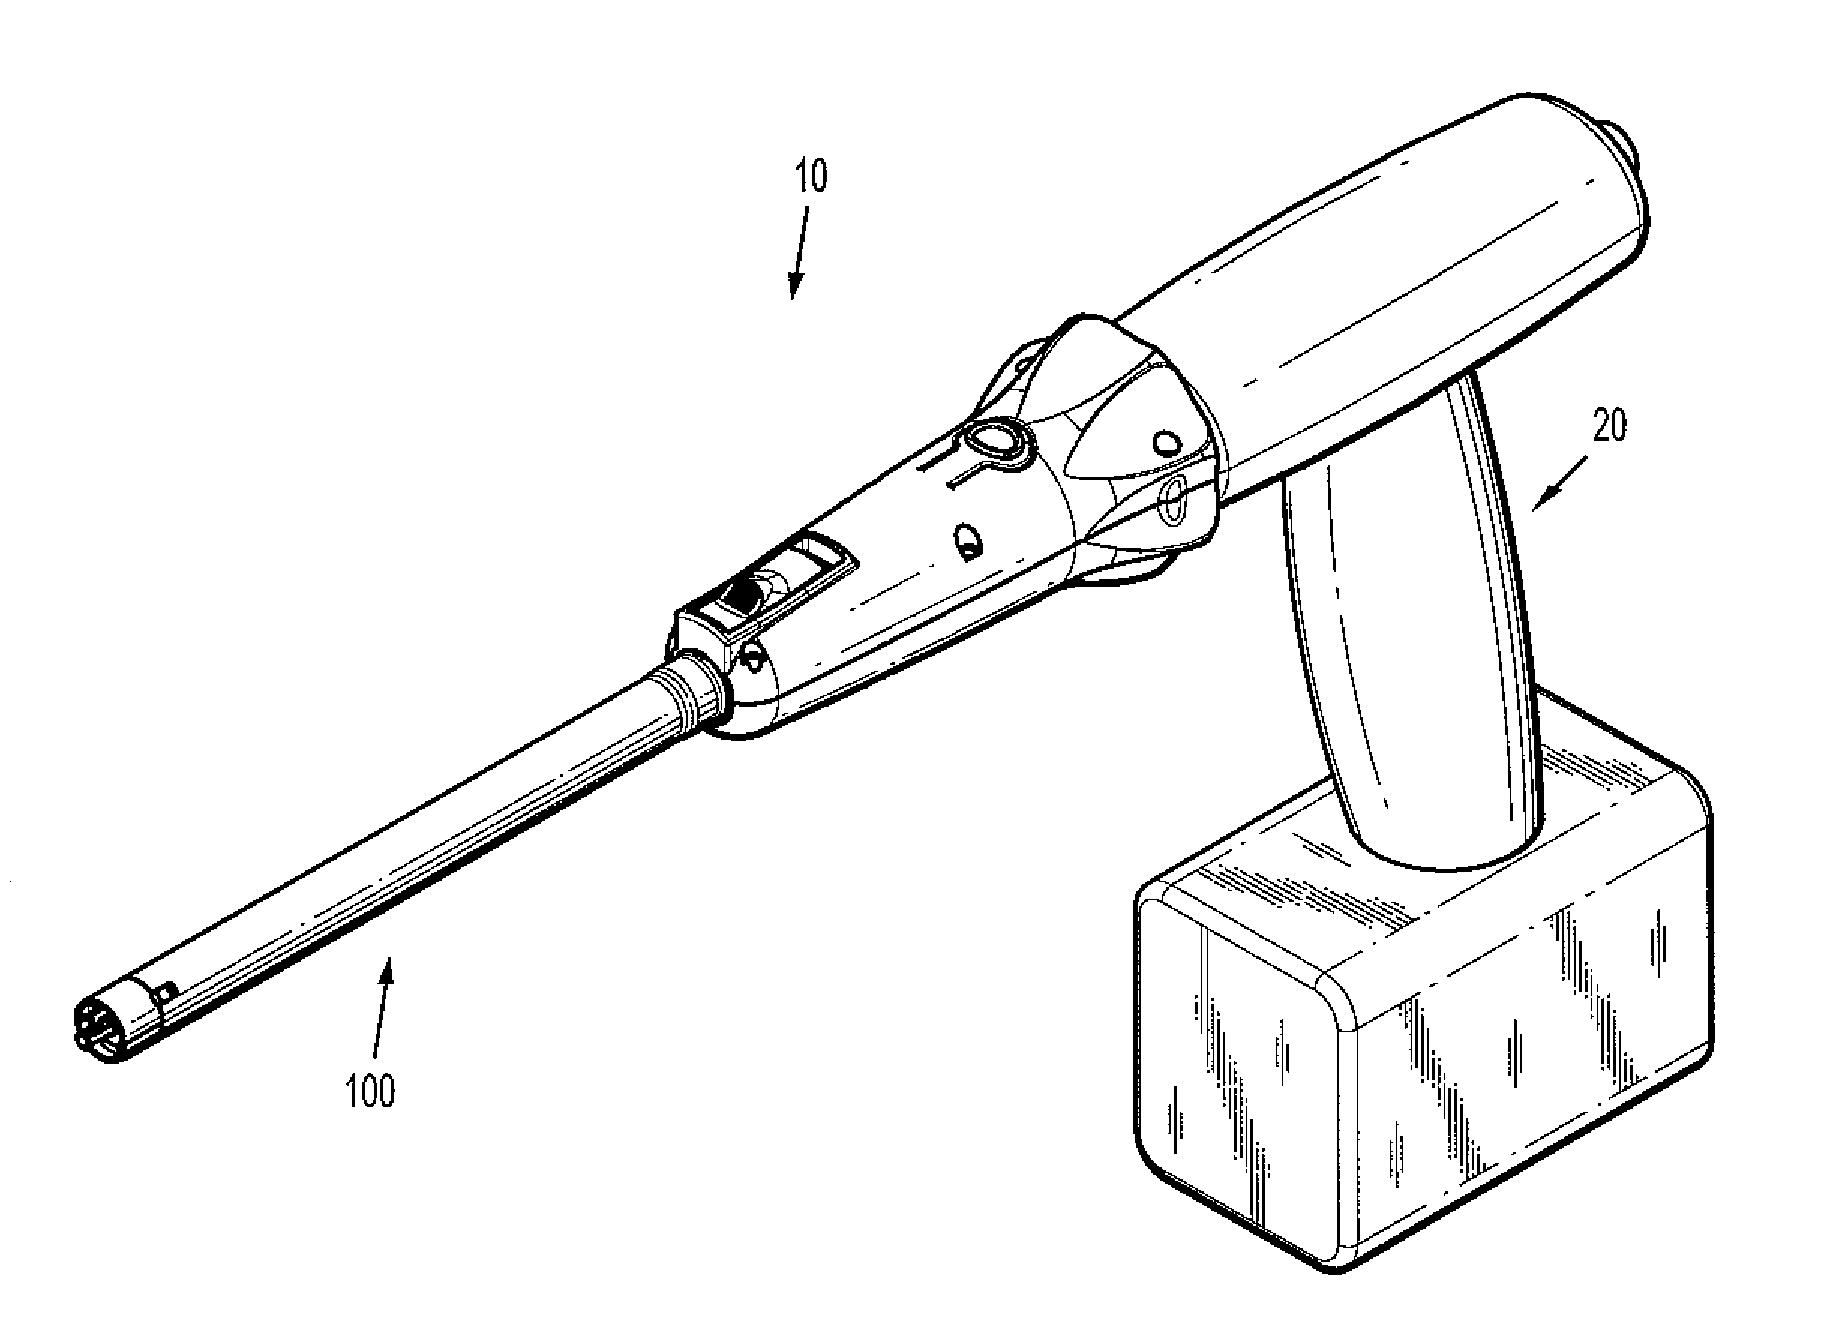 Adapter for powered surgical devices